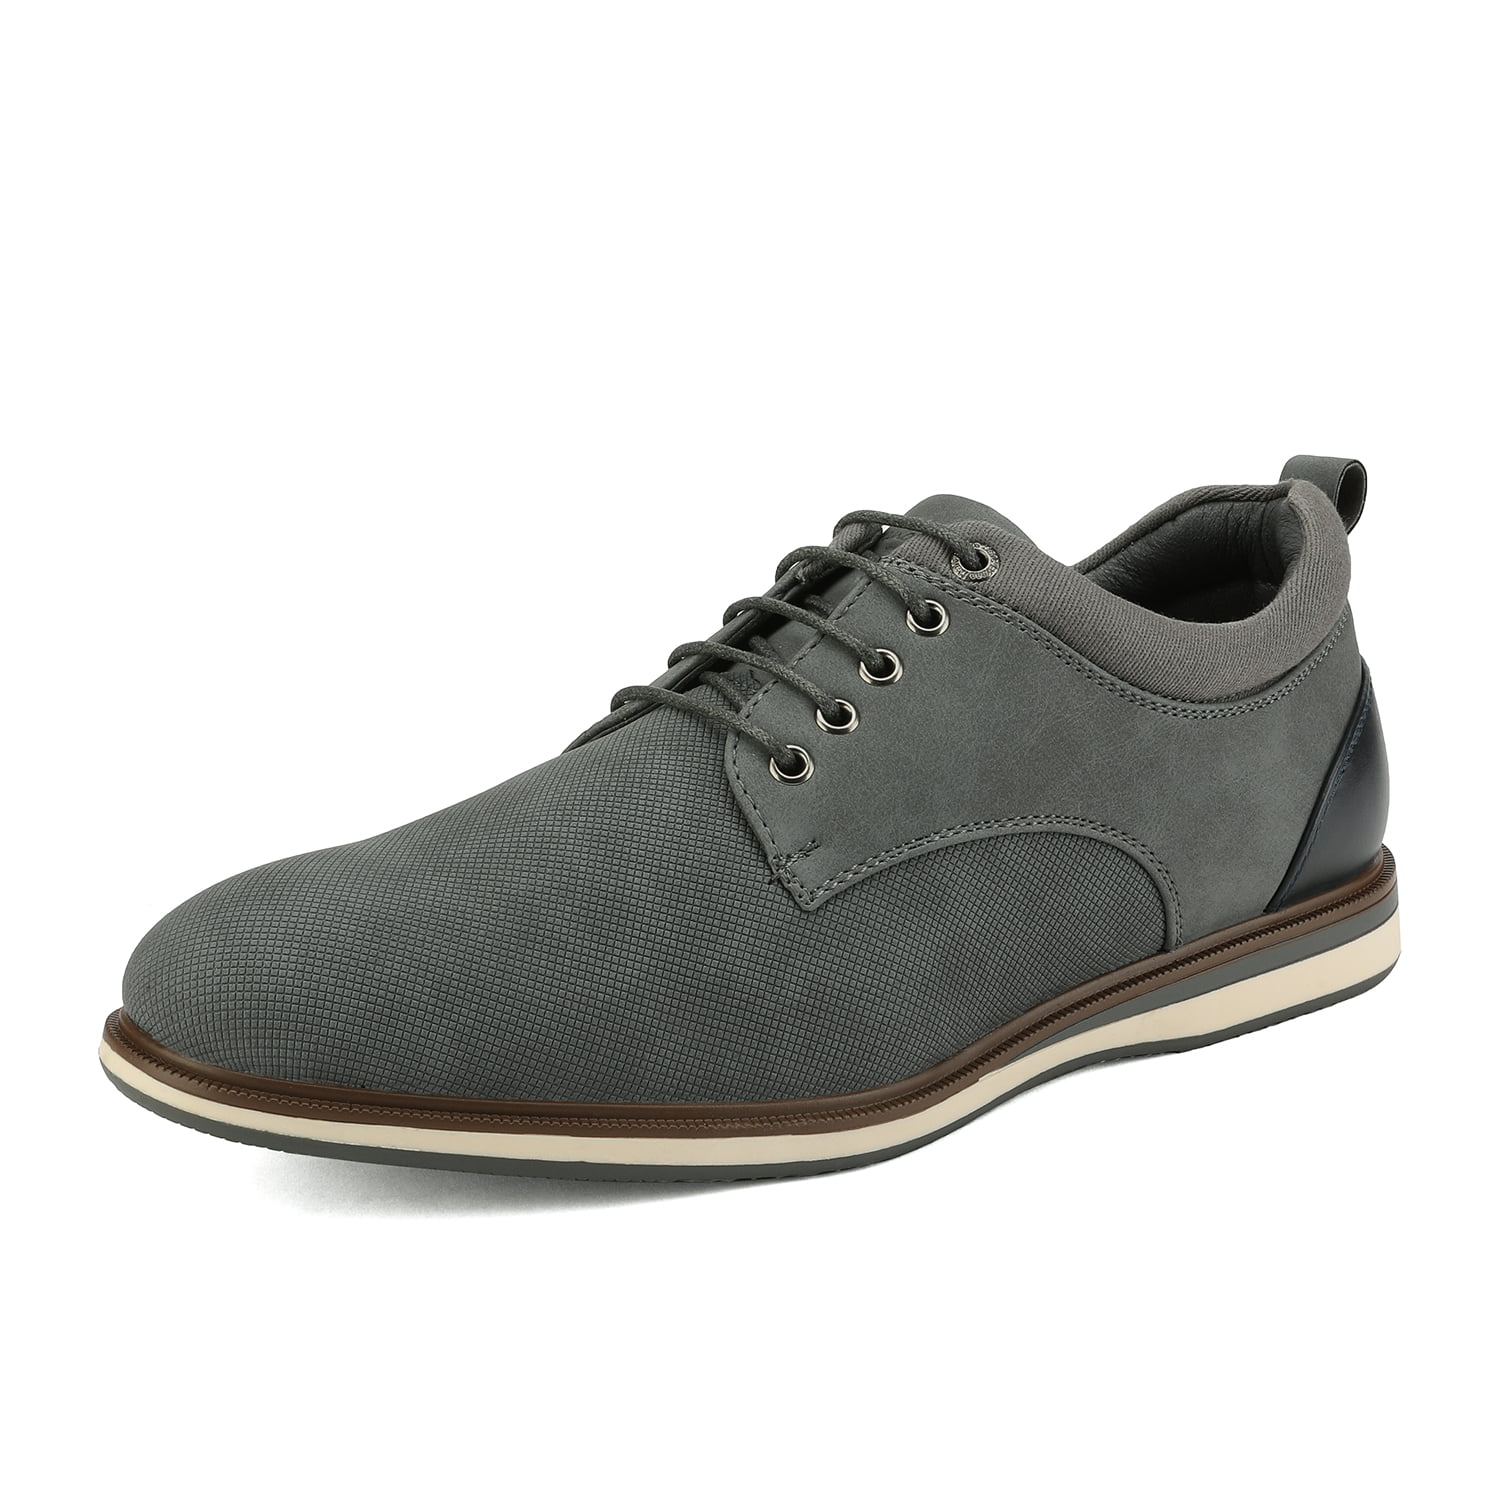 Mens Lace-Up Casual Oxford Dress Shoes 